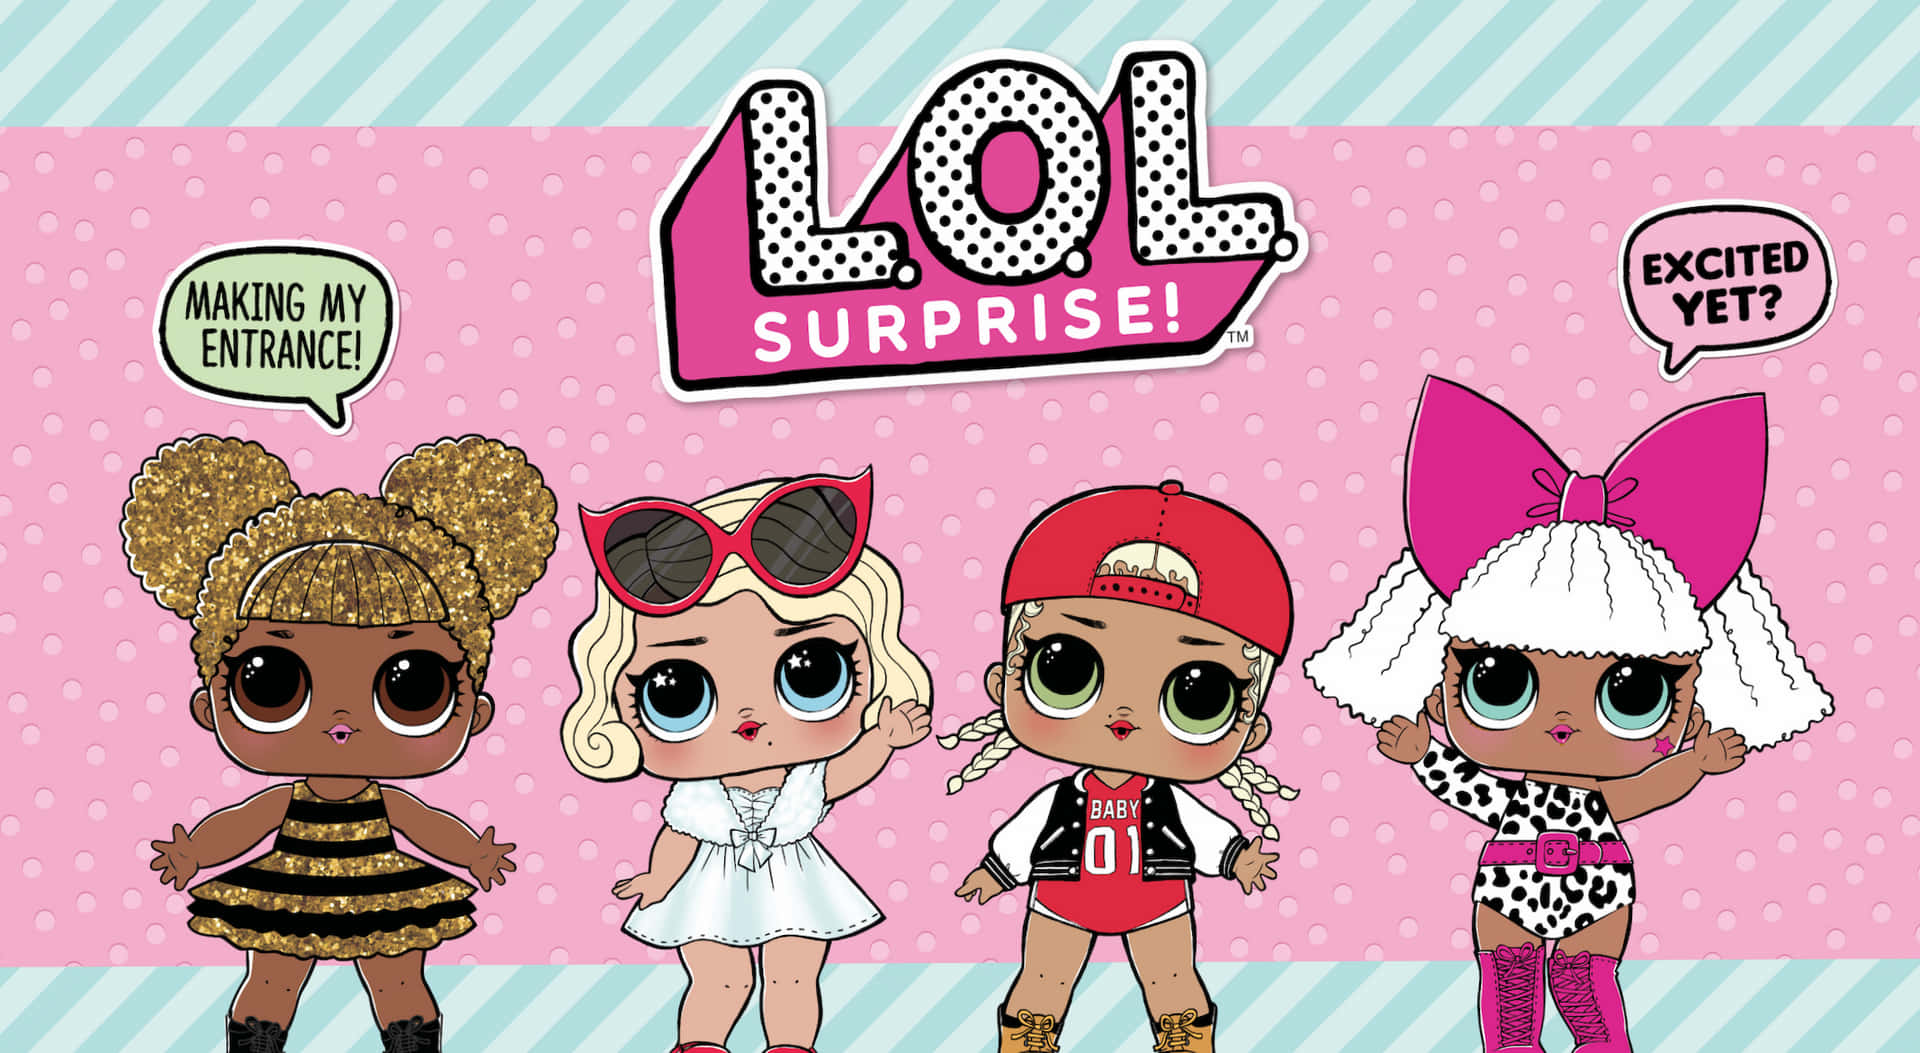 L.O.L. Dolls: The Cute and Collectible Craze That Everyone is Talking About!